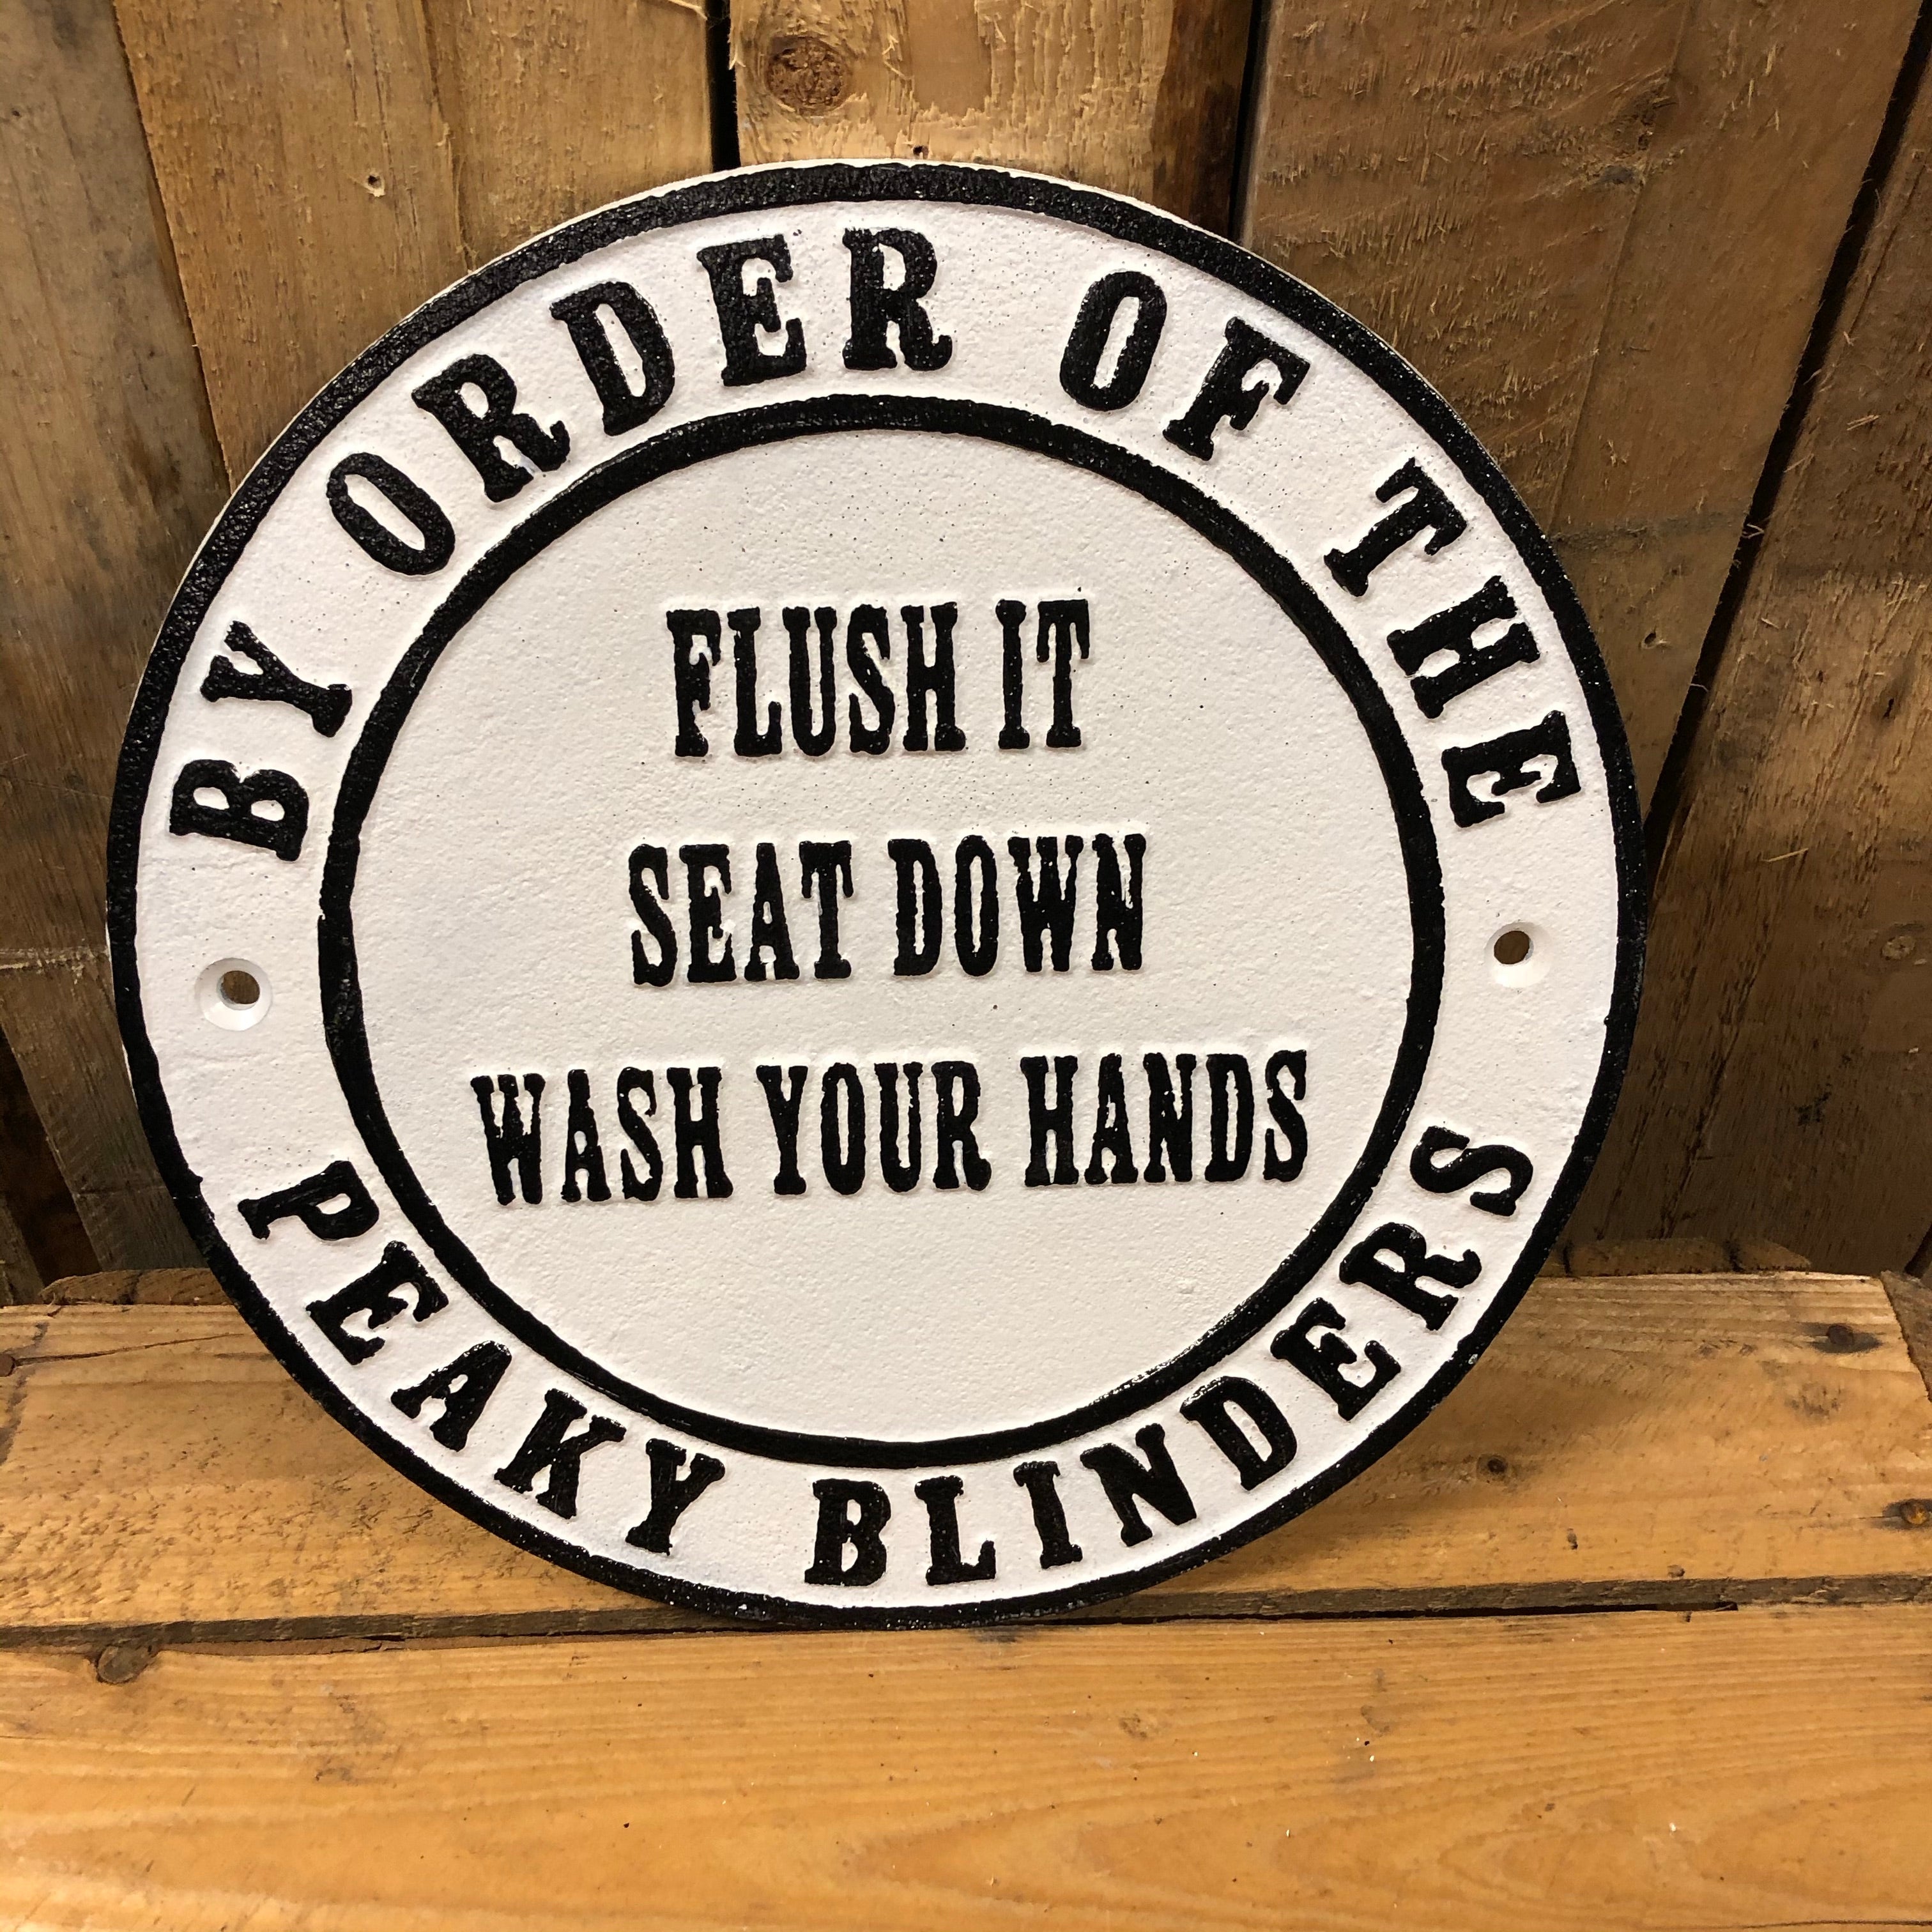 Peaky blinders heavy cast iron sign Flush it seat down